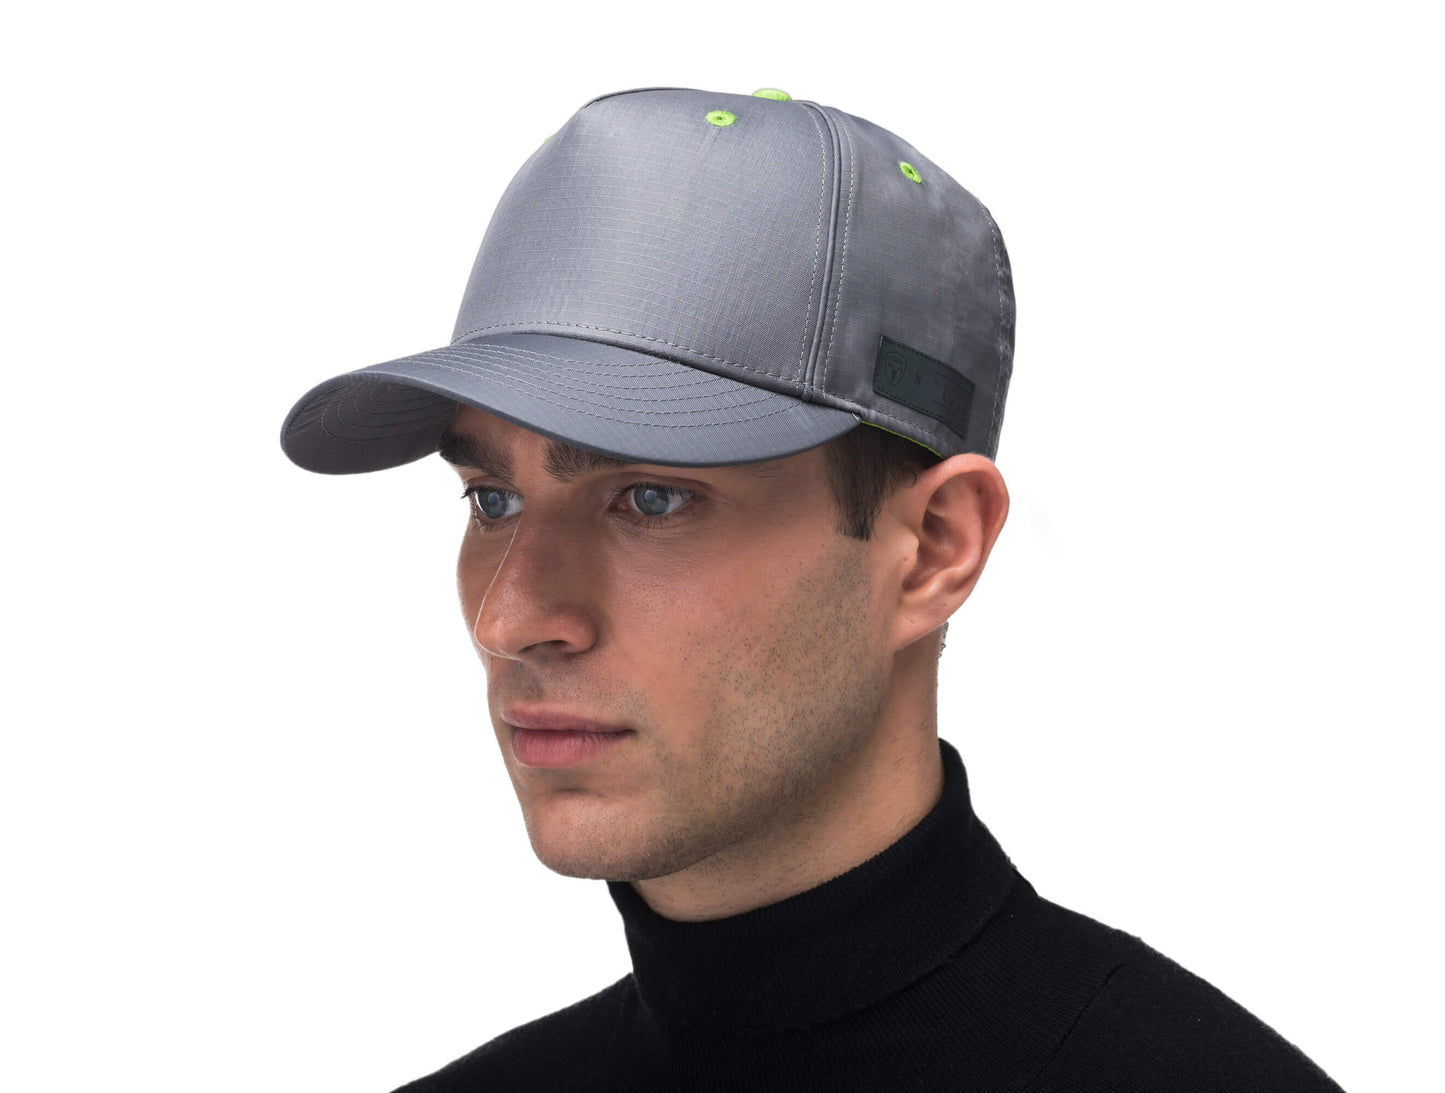 Unisex 5 panel baseball cap with adjustable back and contrast colour detailing in Concrete